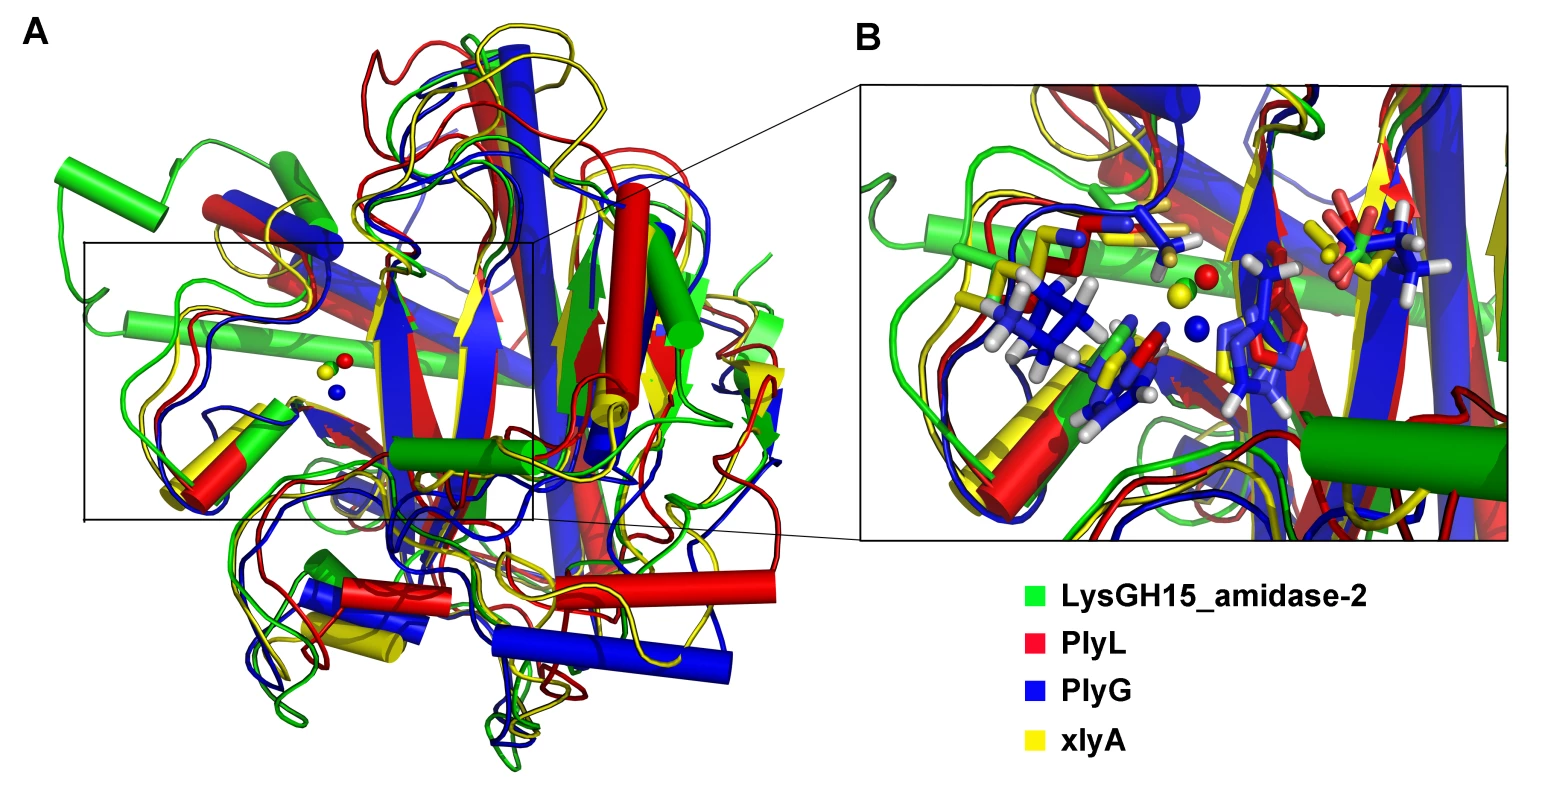 Structural comparison of the LysGH15 amidase-2 domain with homologous proteins.